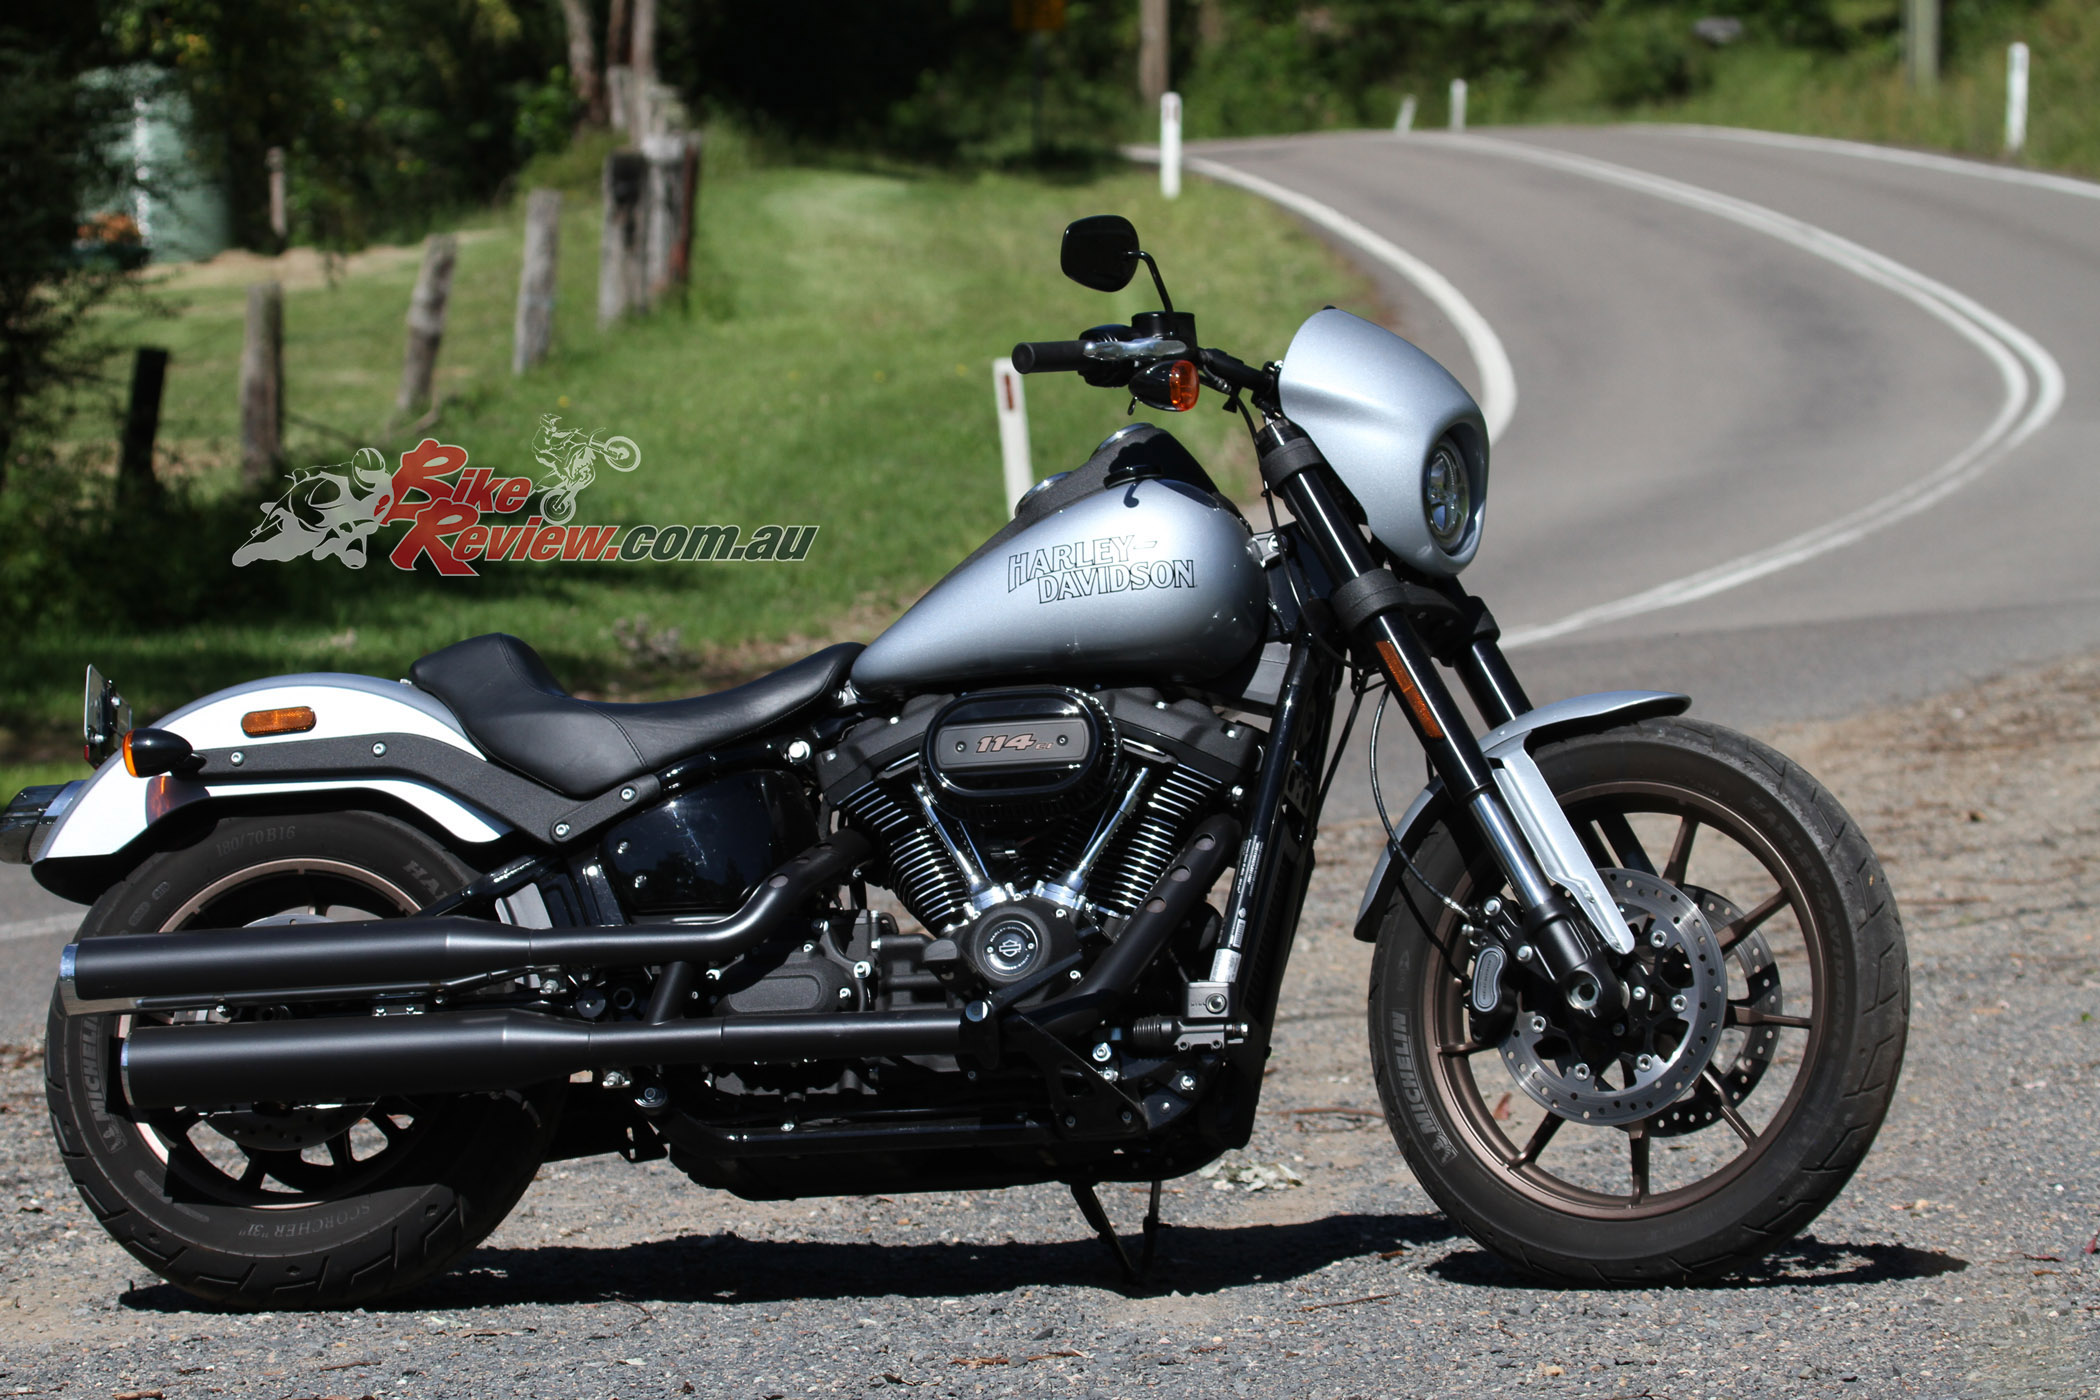 Review 2020 Harley Davidson Fxlrs Low Rider S Bike Review